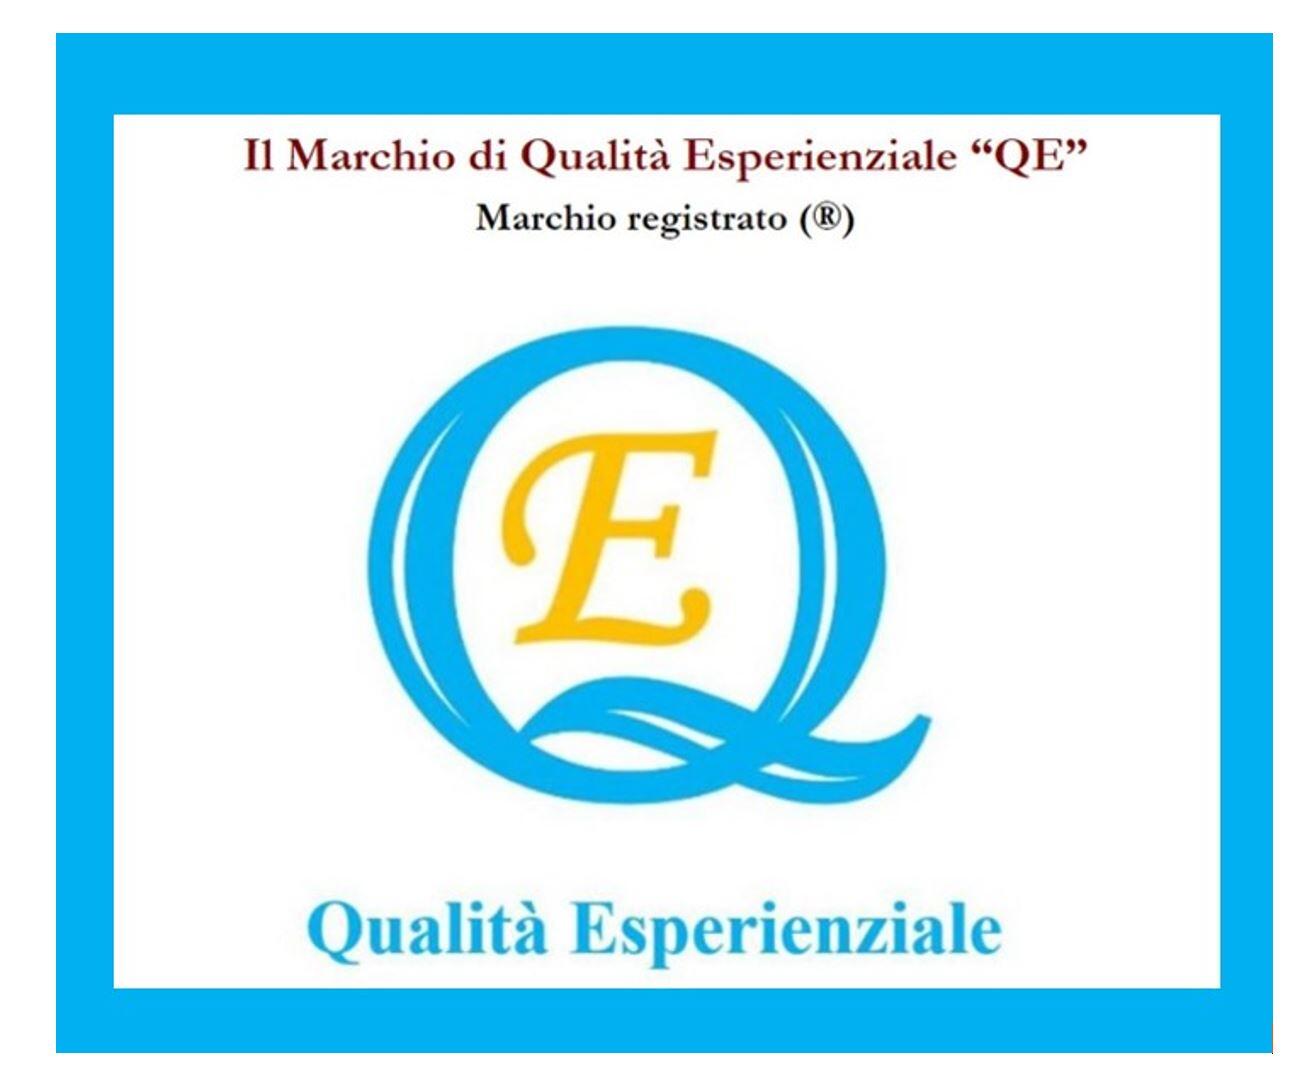 The "QE" Experiential Quality Mark